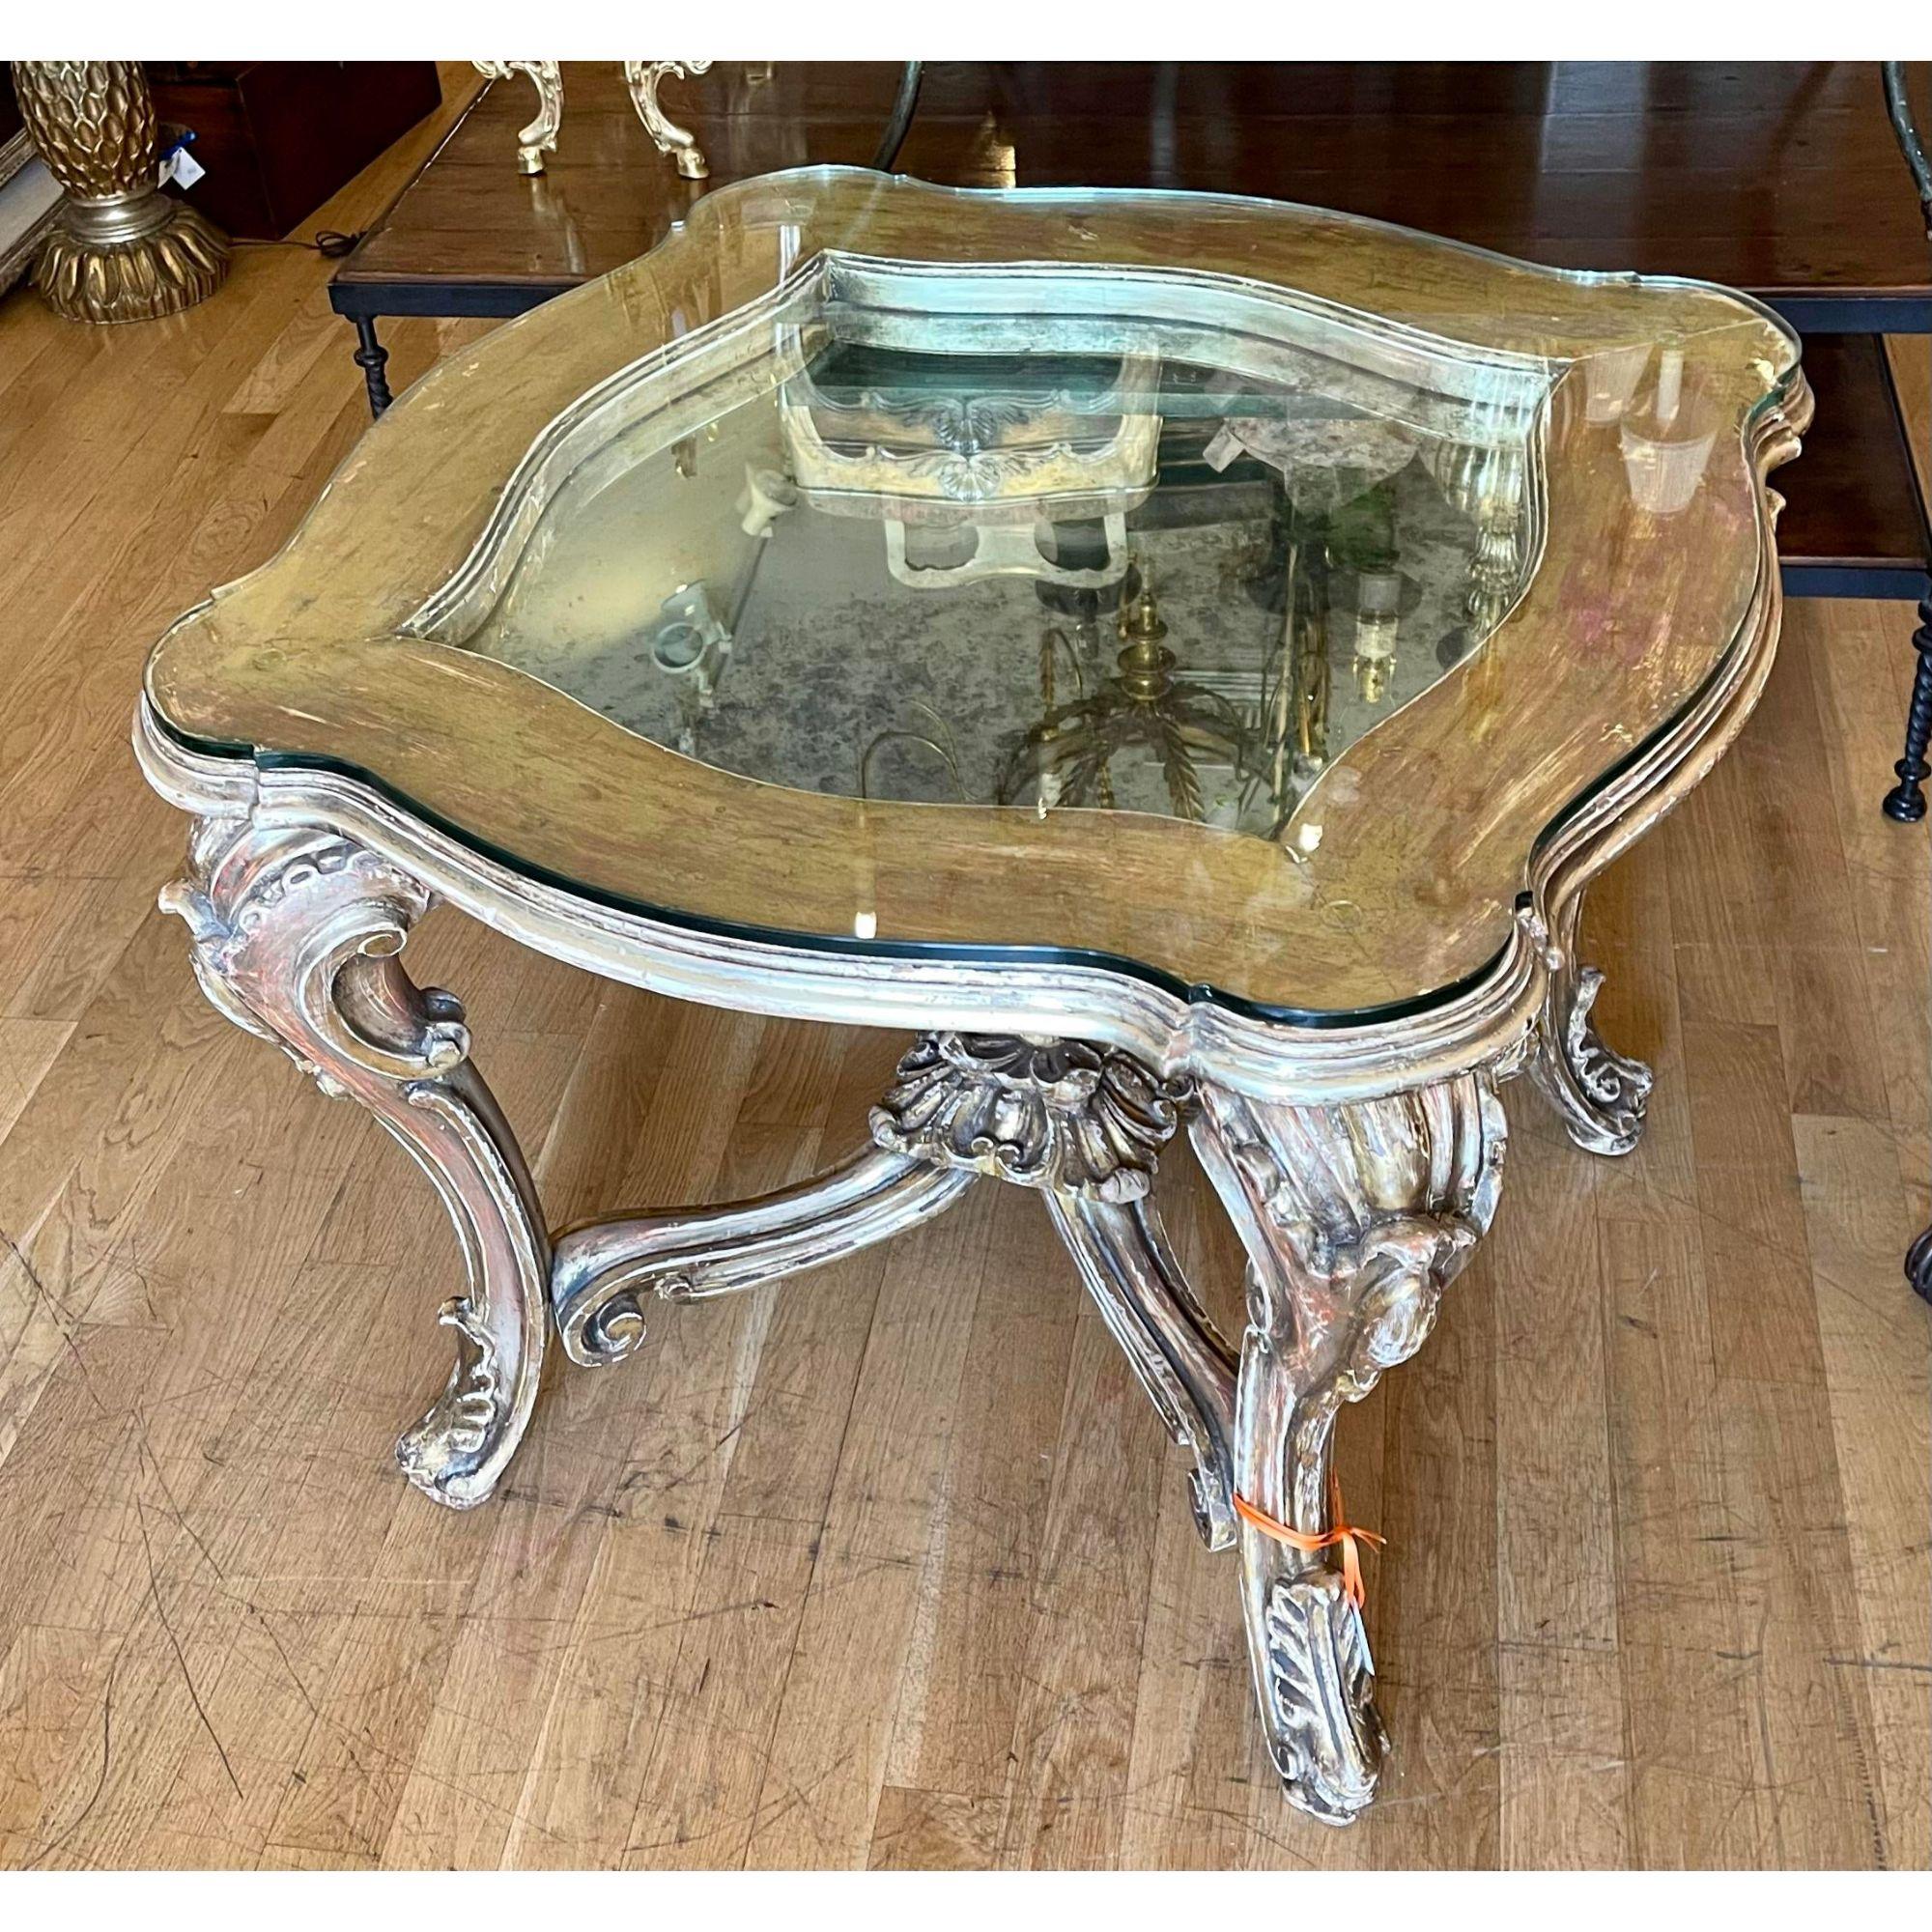 Spanish Antique 18th Century Style Rococo Venetian Giltwood Table by W Antiqued Mirror For Sale